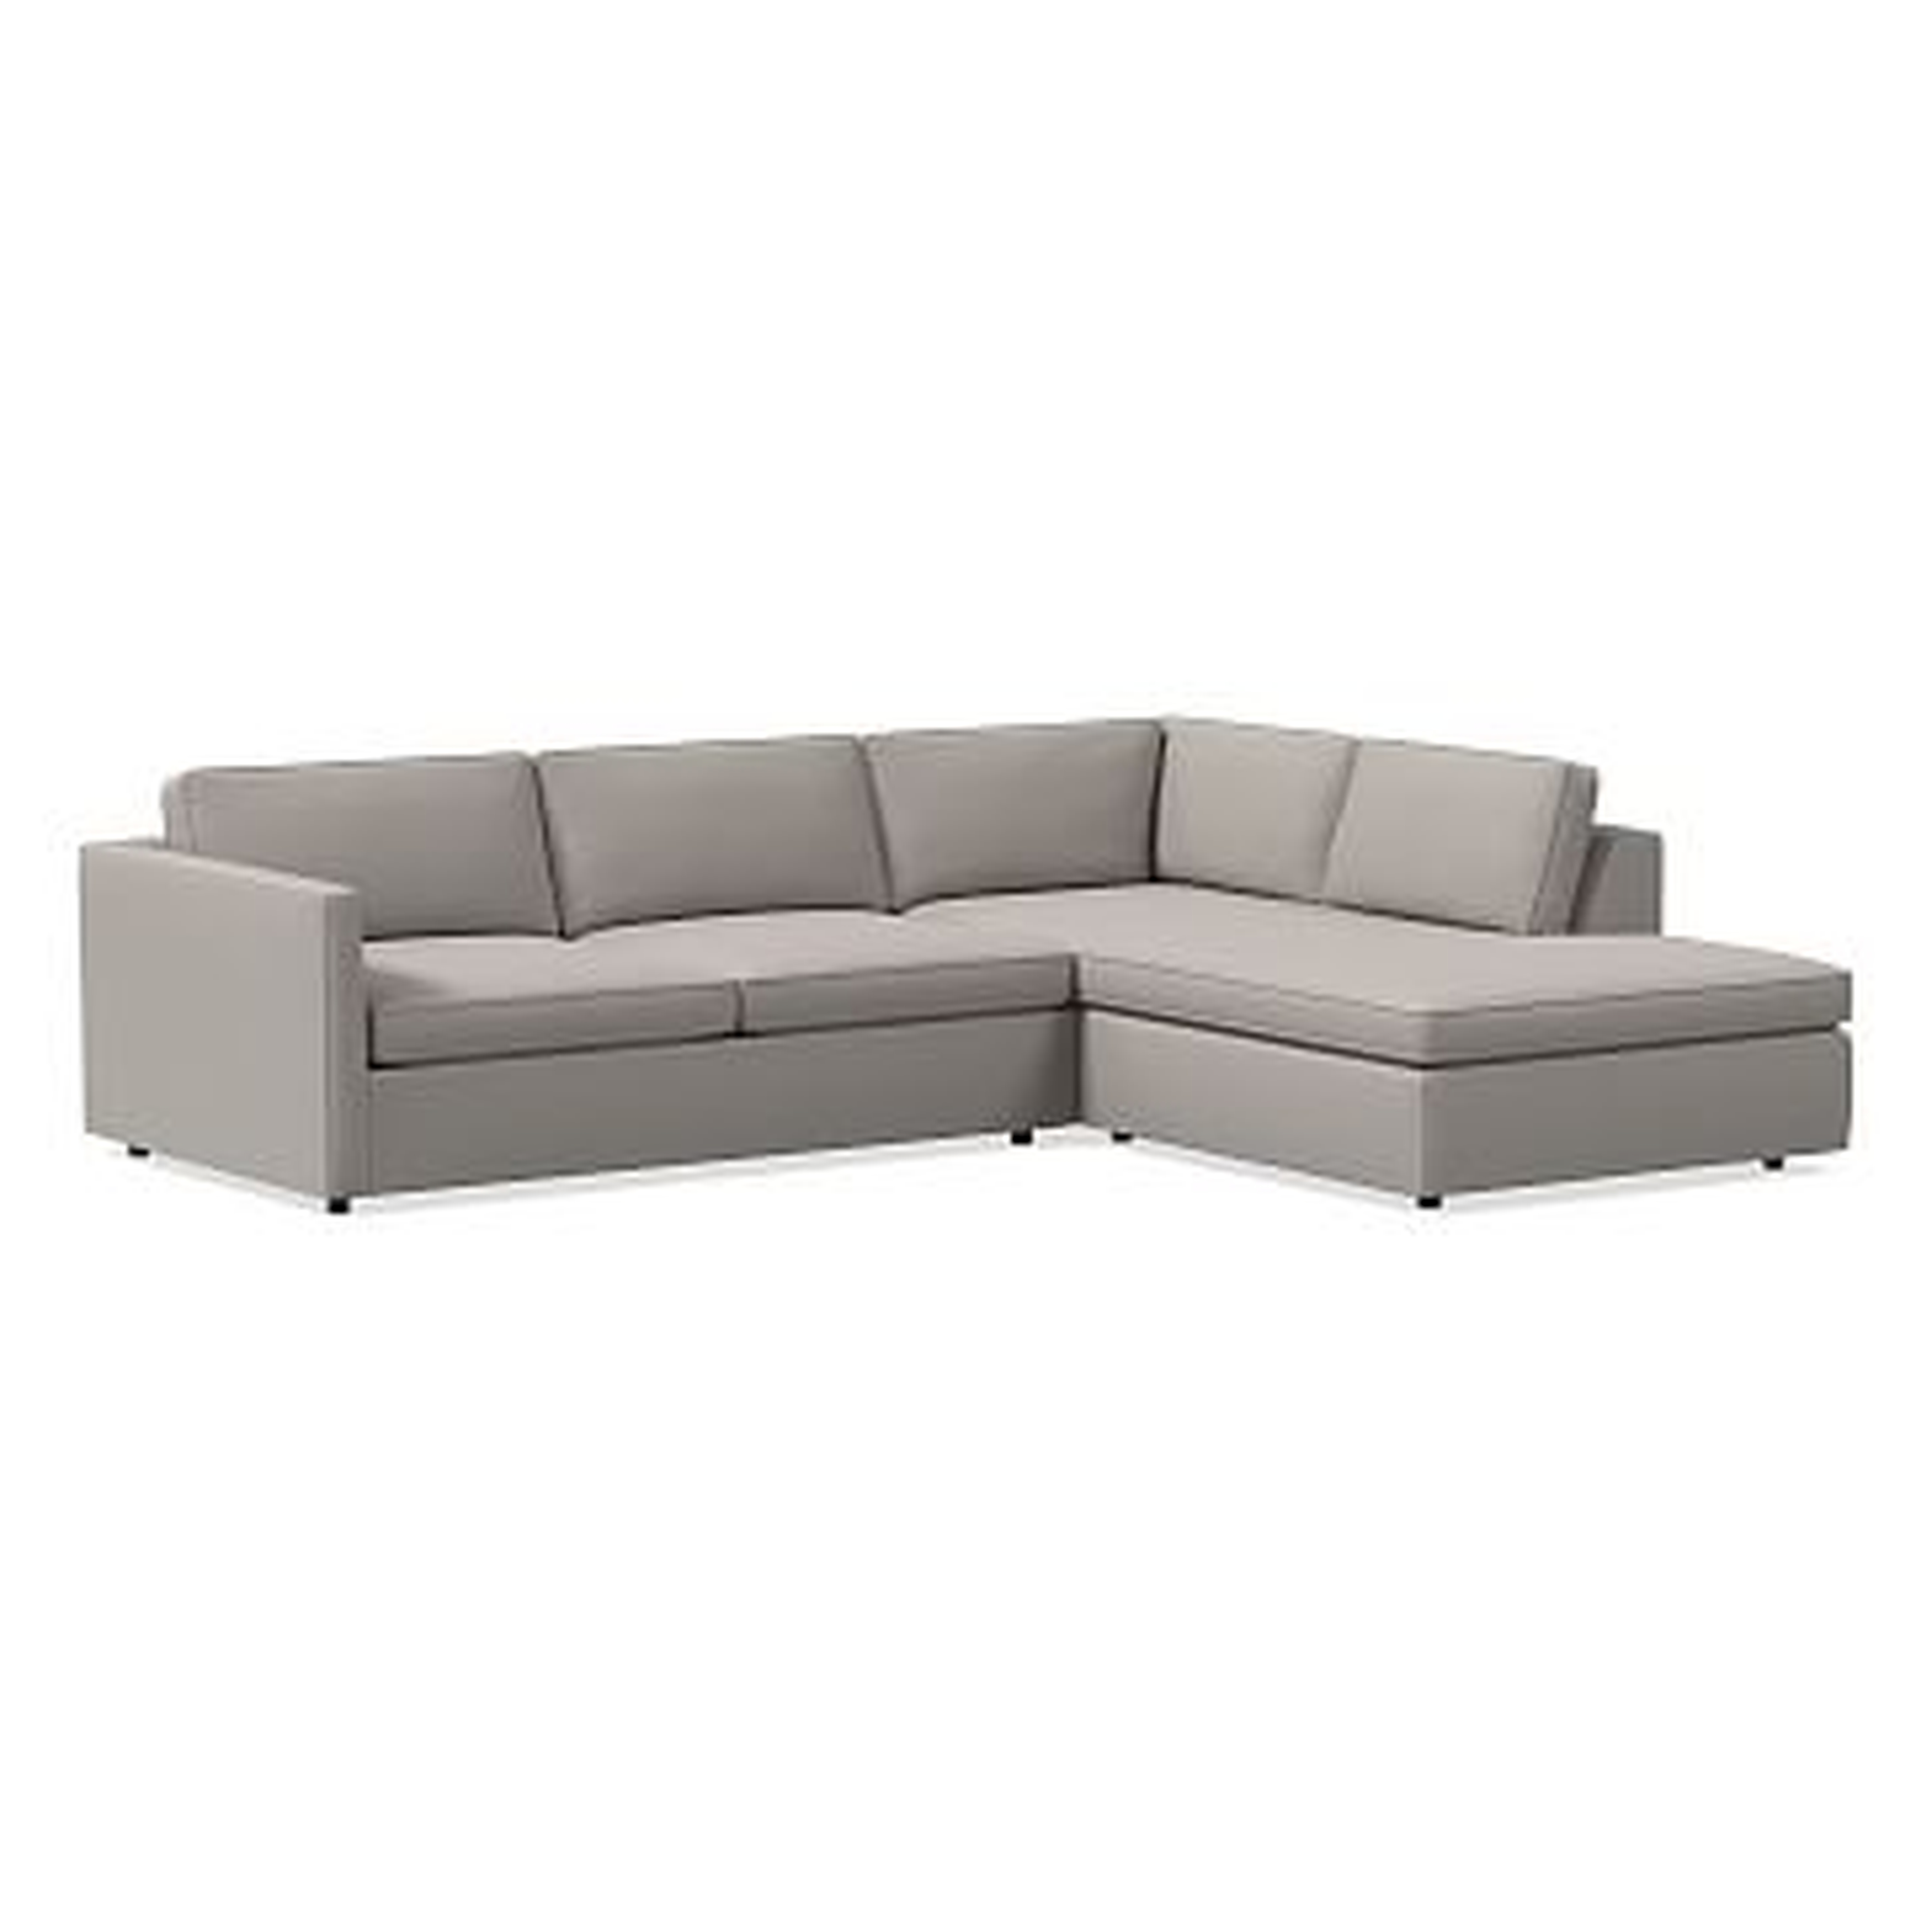 Harris Sectional Set 26: XL LA 75" Sofa, XL RA Terminal Chaise, Poly, Performance Velvet, Silver, Concealed Supports - West Elm